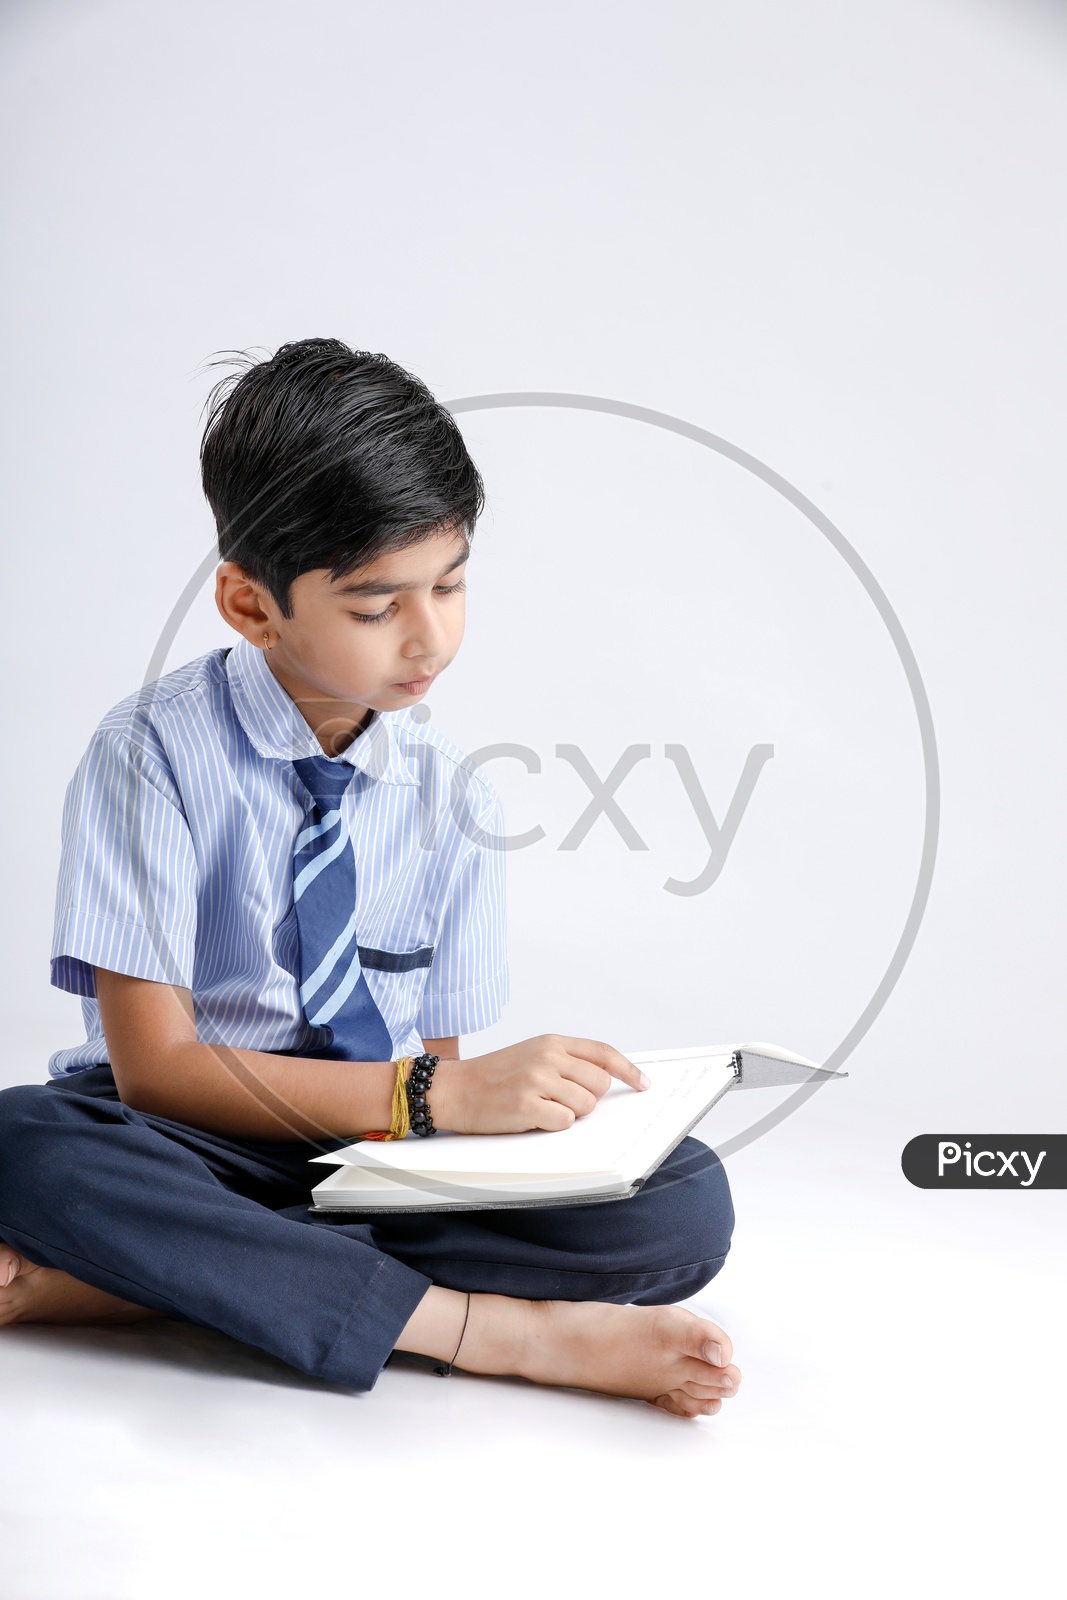 Indian or Asian Kid Or Boy Or Student  In School Uniform And Reading  Book Over an Isolated White Background